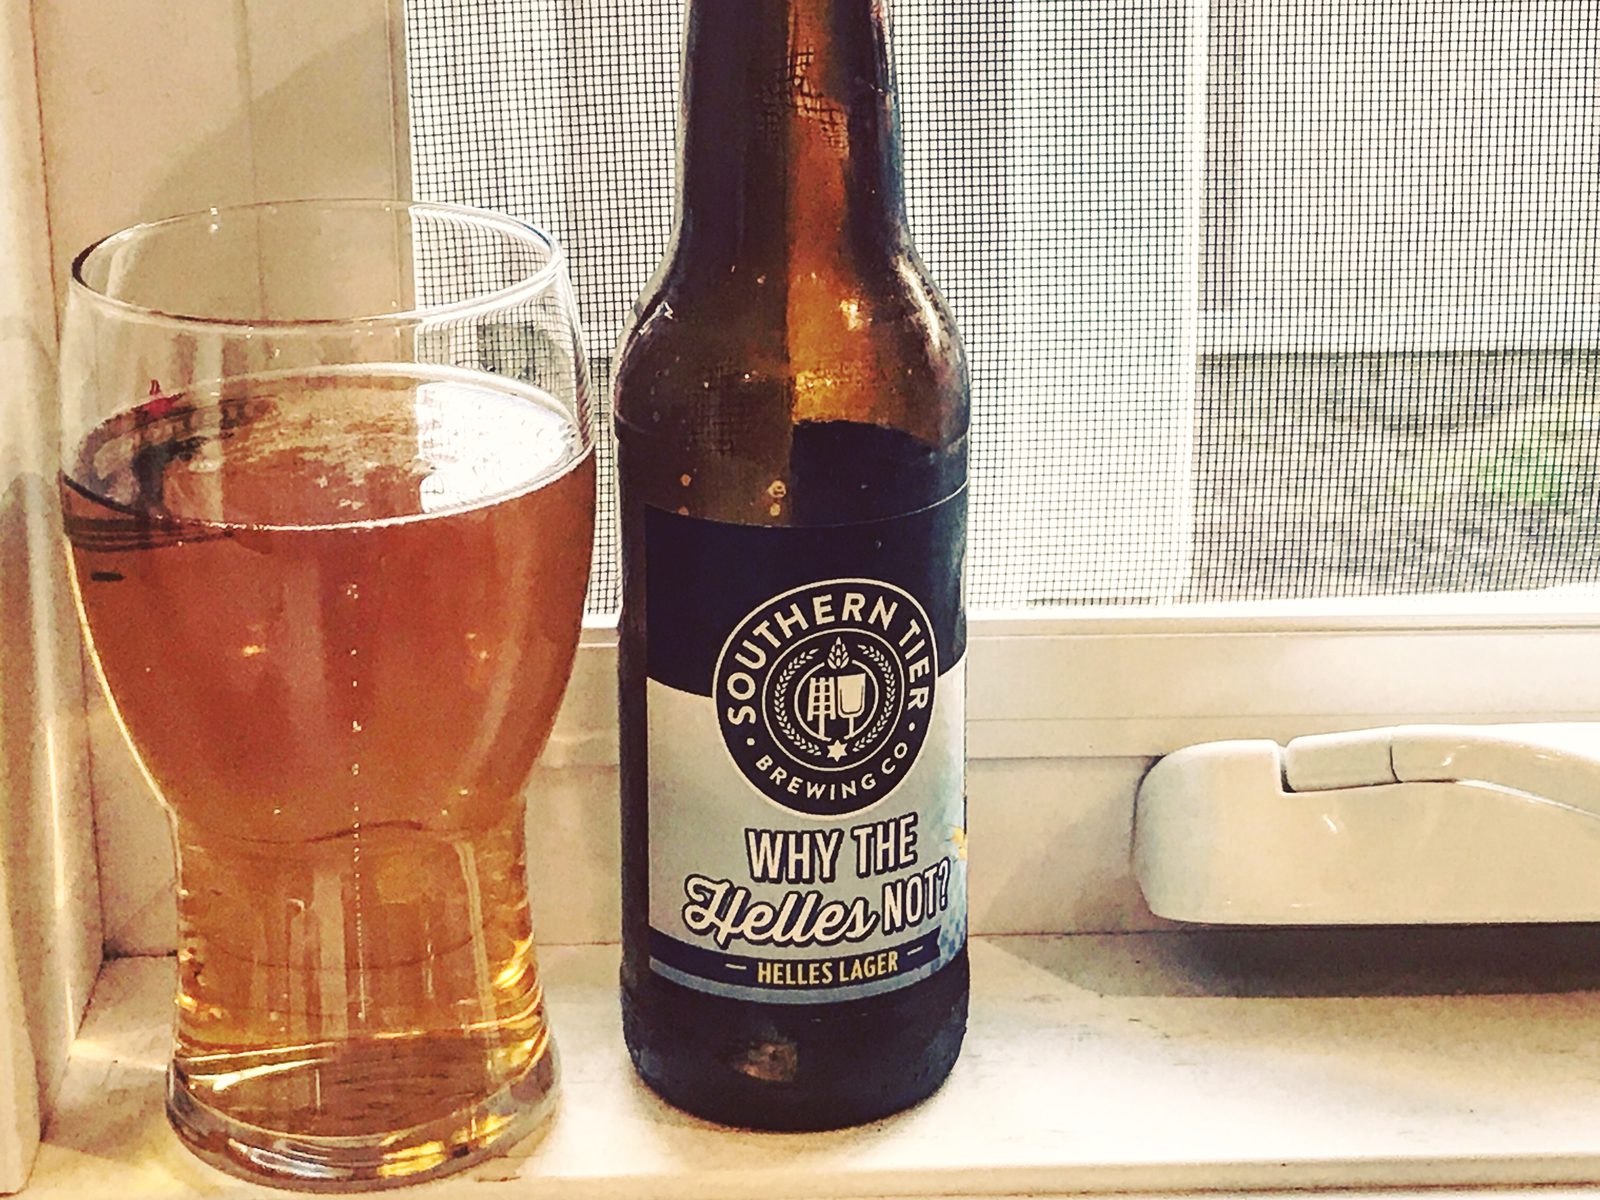 Southern Tier Brewing Company: Why the Helles Not?